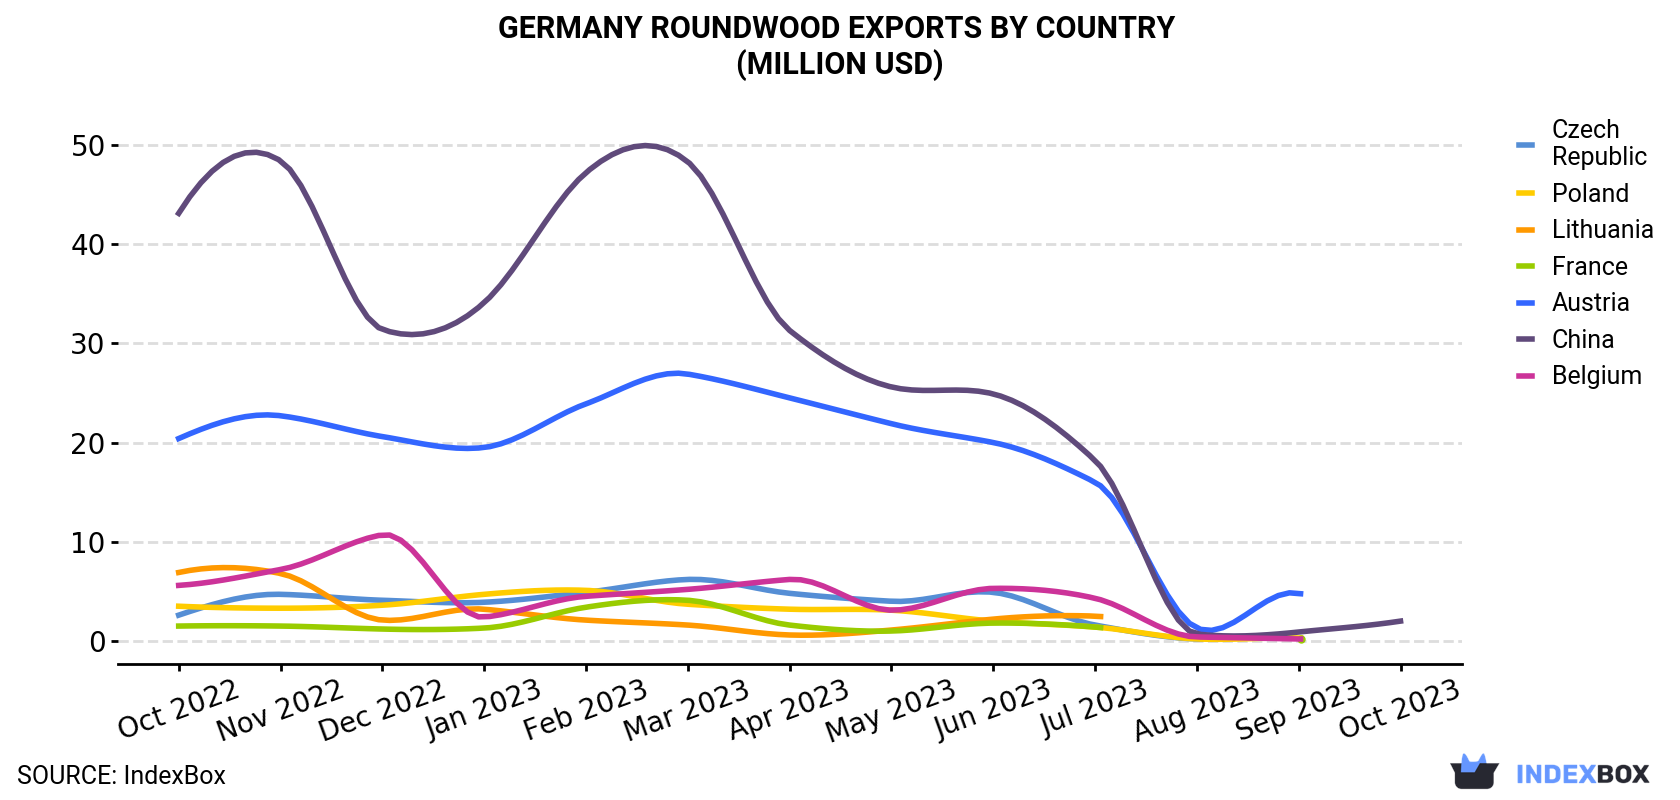 Germany Roundwood Exports By Country (Million USD)